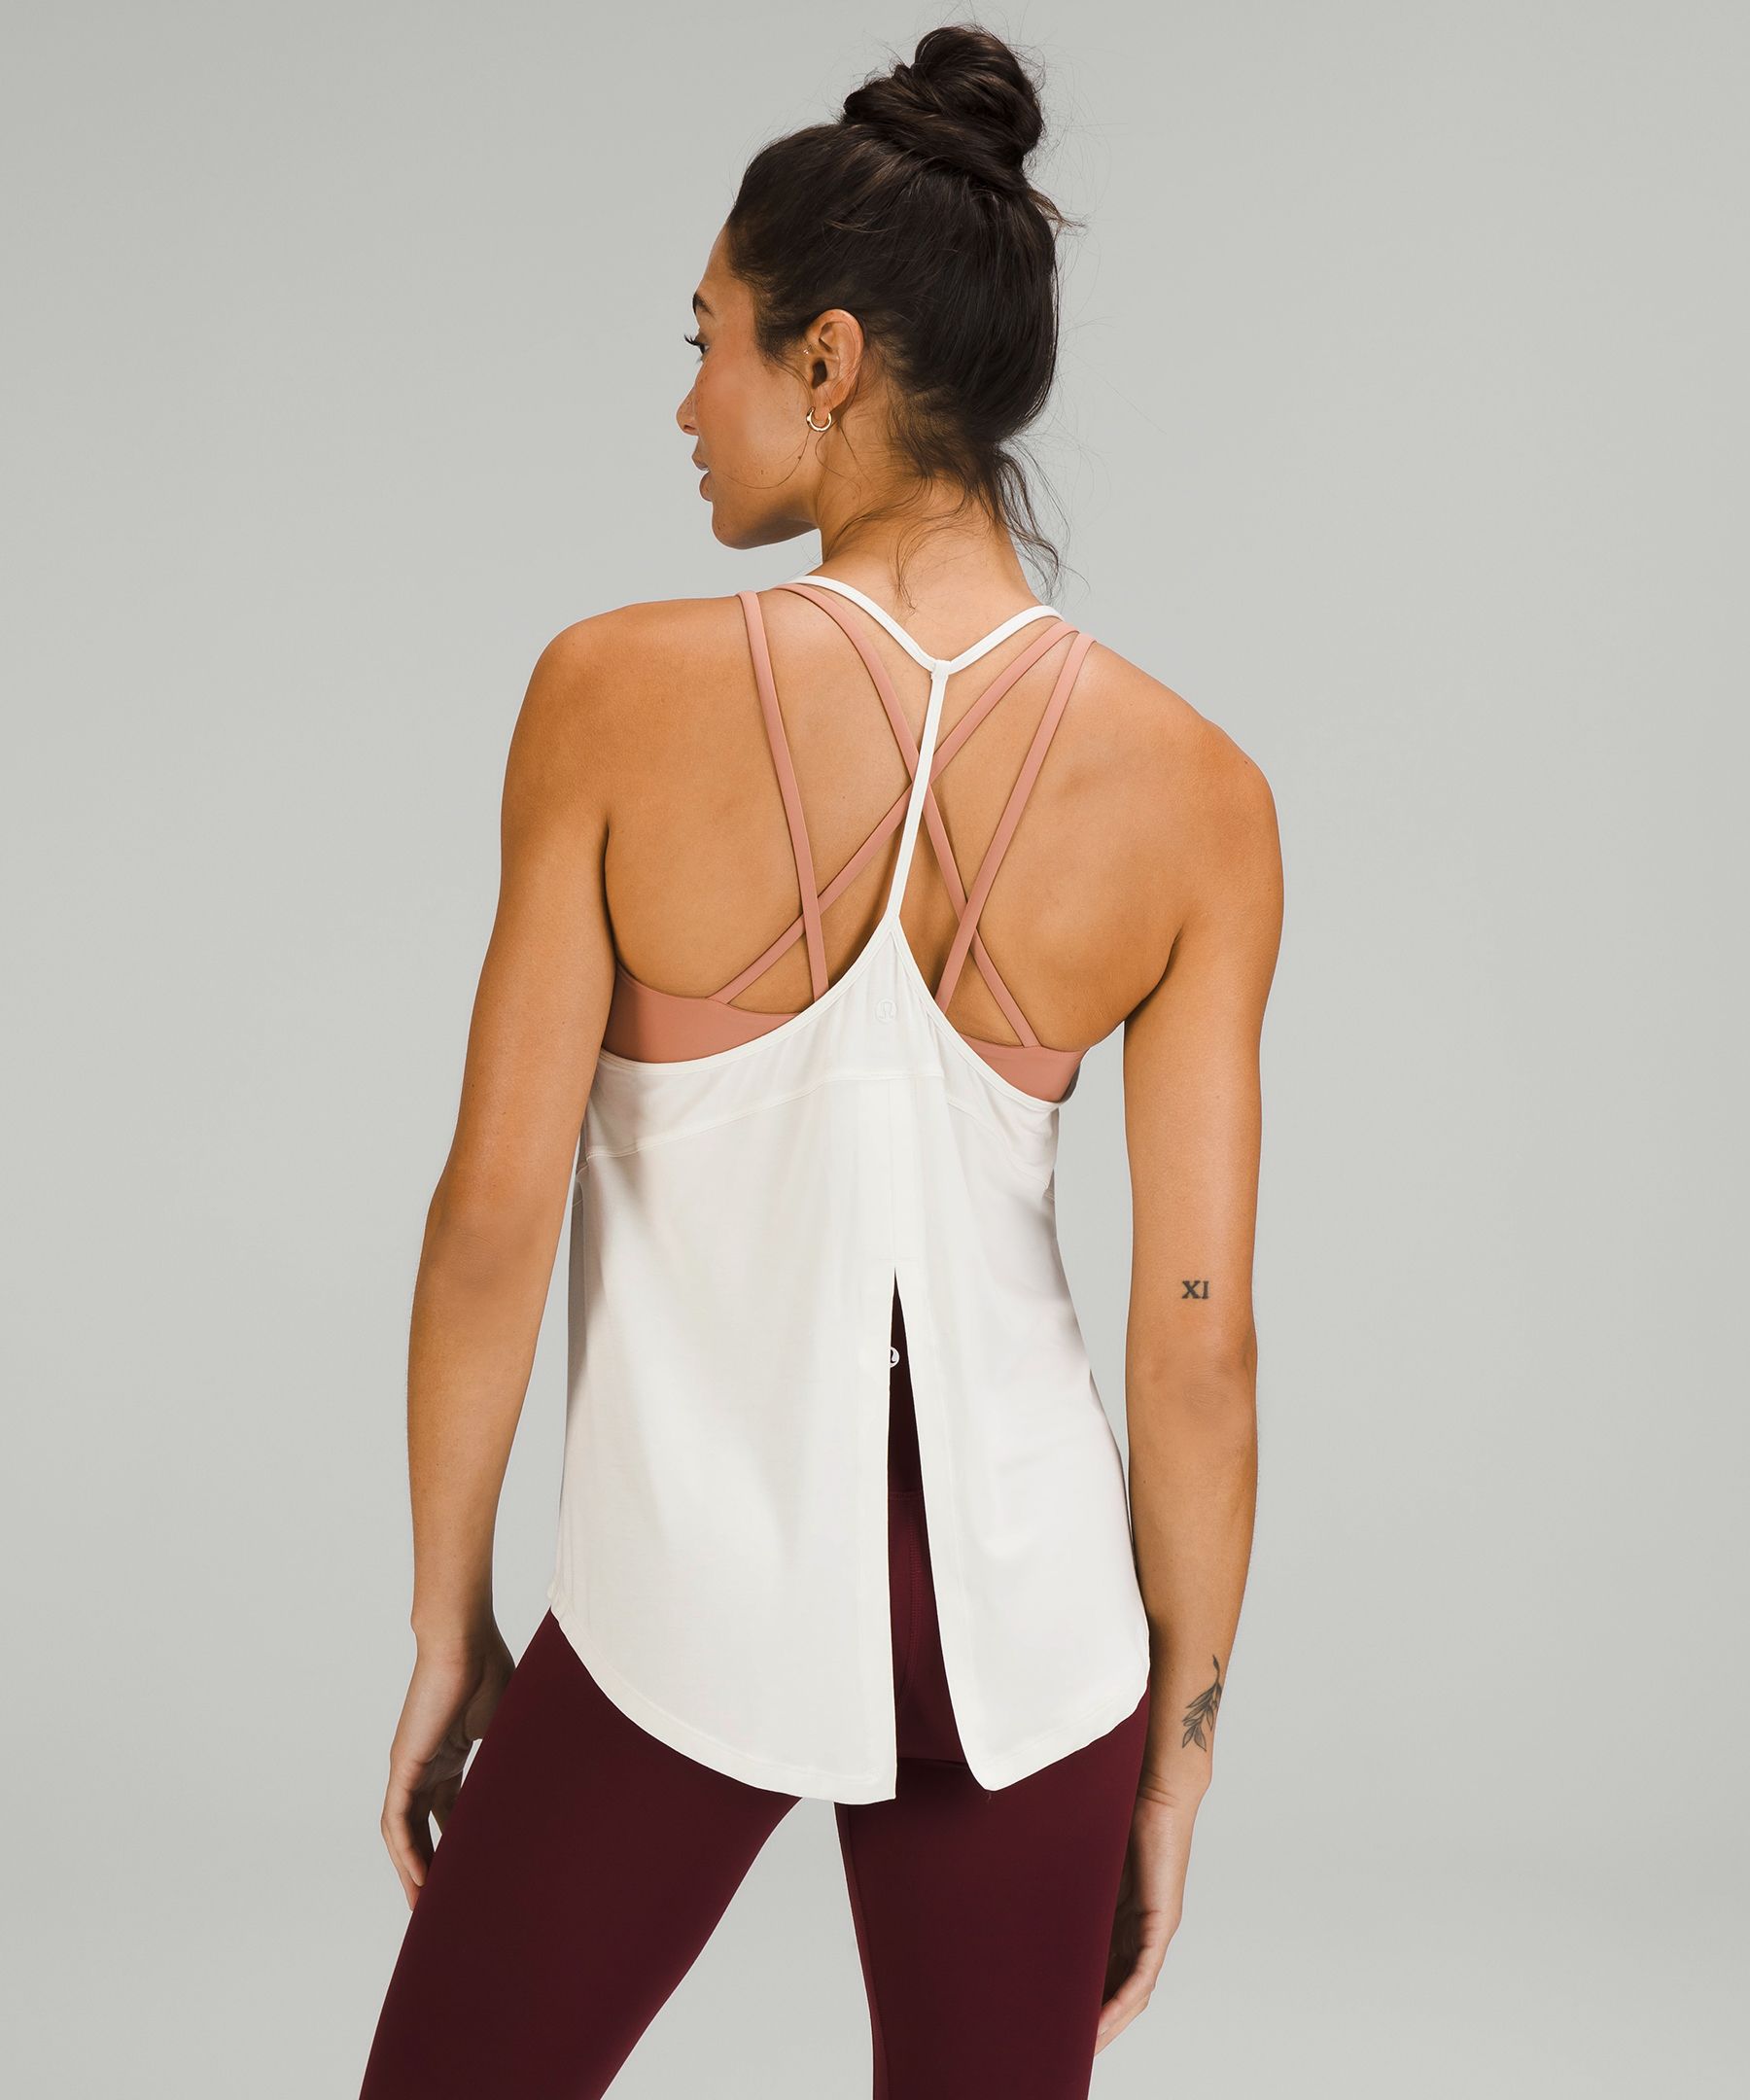 Modal silk yoga tank is fantastic! I just got mine today and I